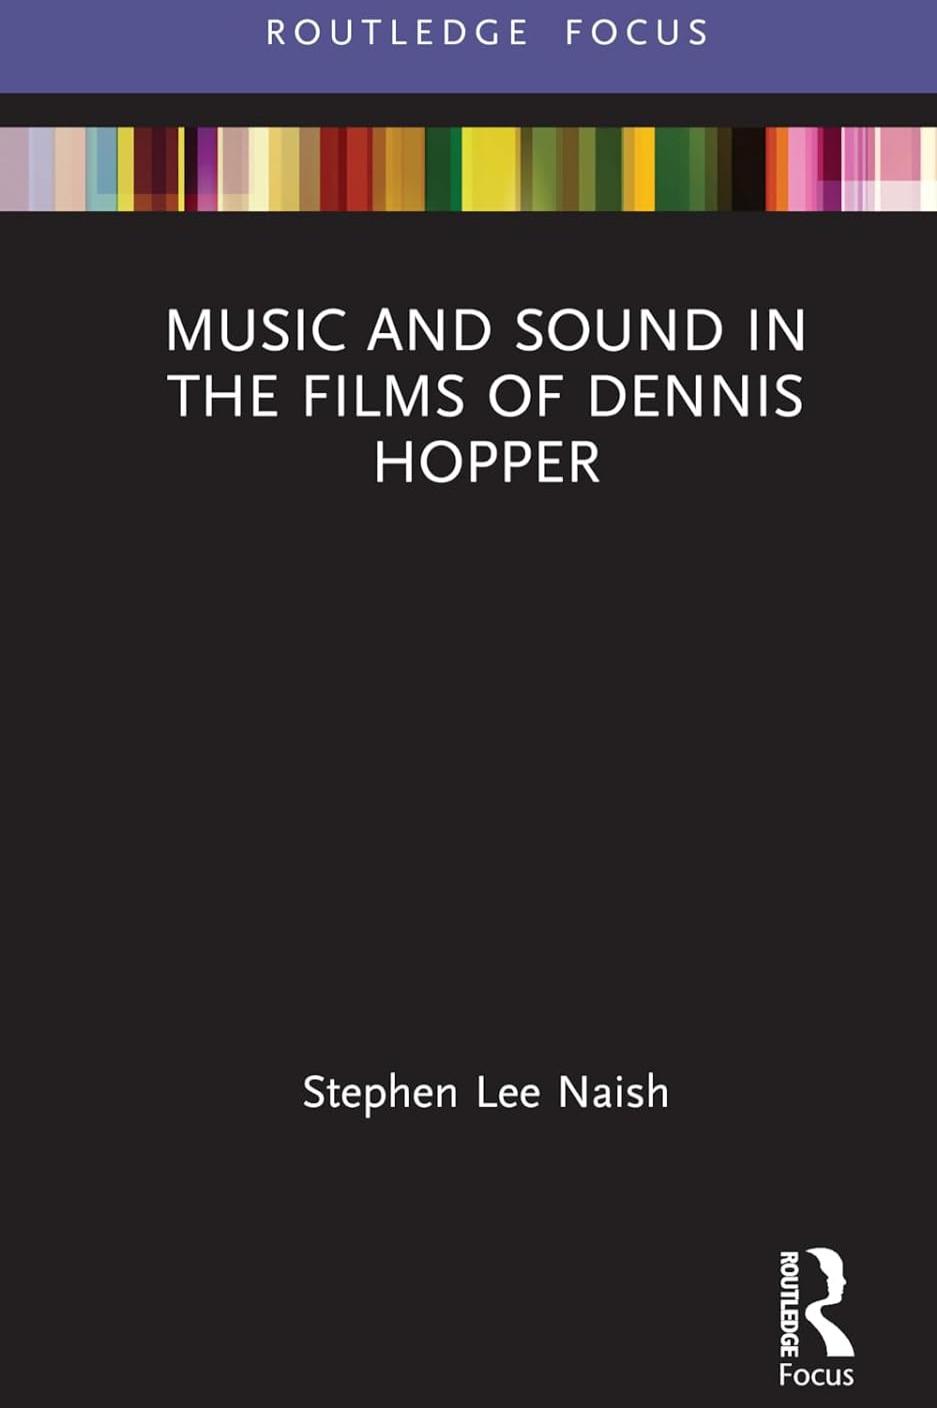 Book cover of Music and Sound in the Films of Dennis Hopper by Stephen Lee Naish